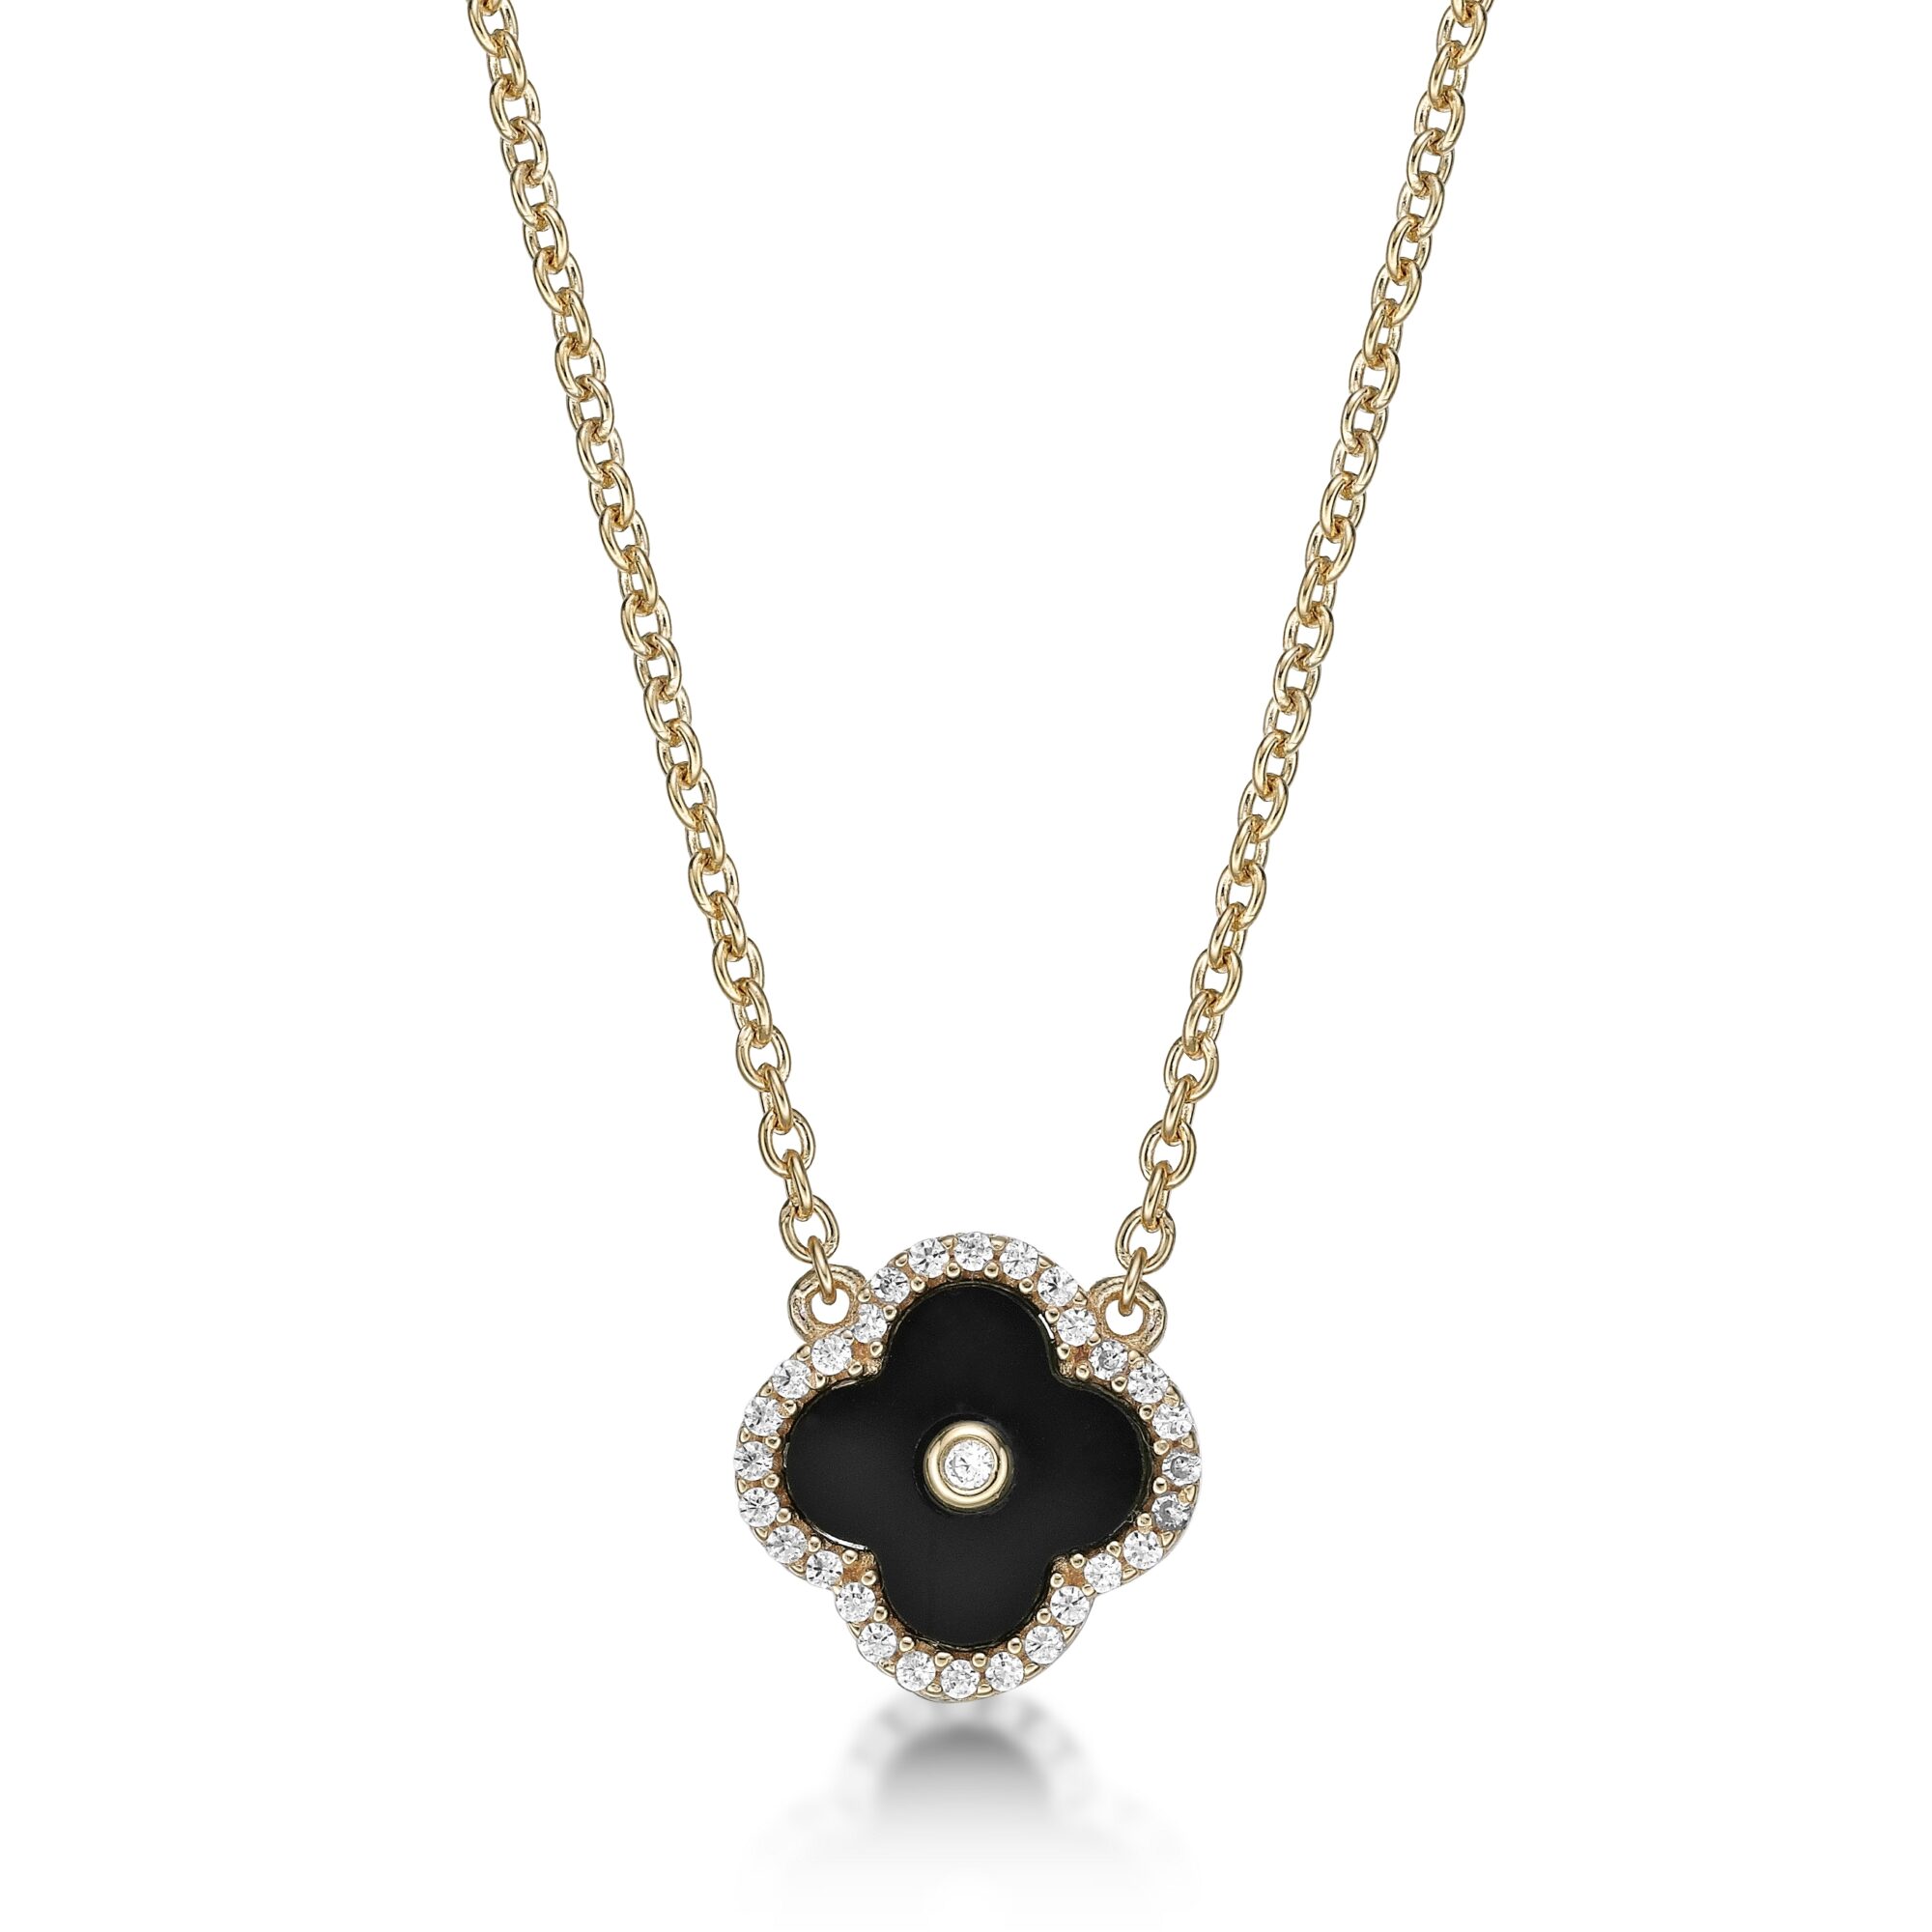 Lavari Jewelers Women’s Black Onyx Flower Pendant with Lobster Clasp Necklace, 925 Yellow Sterling Silver, Cubic Zirconia, 16-18 Inches